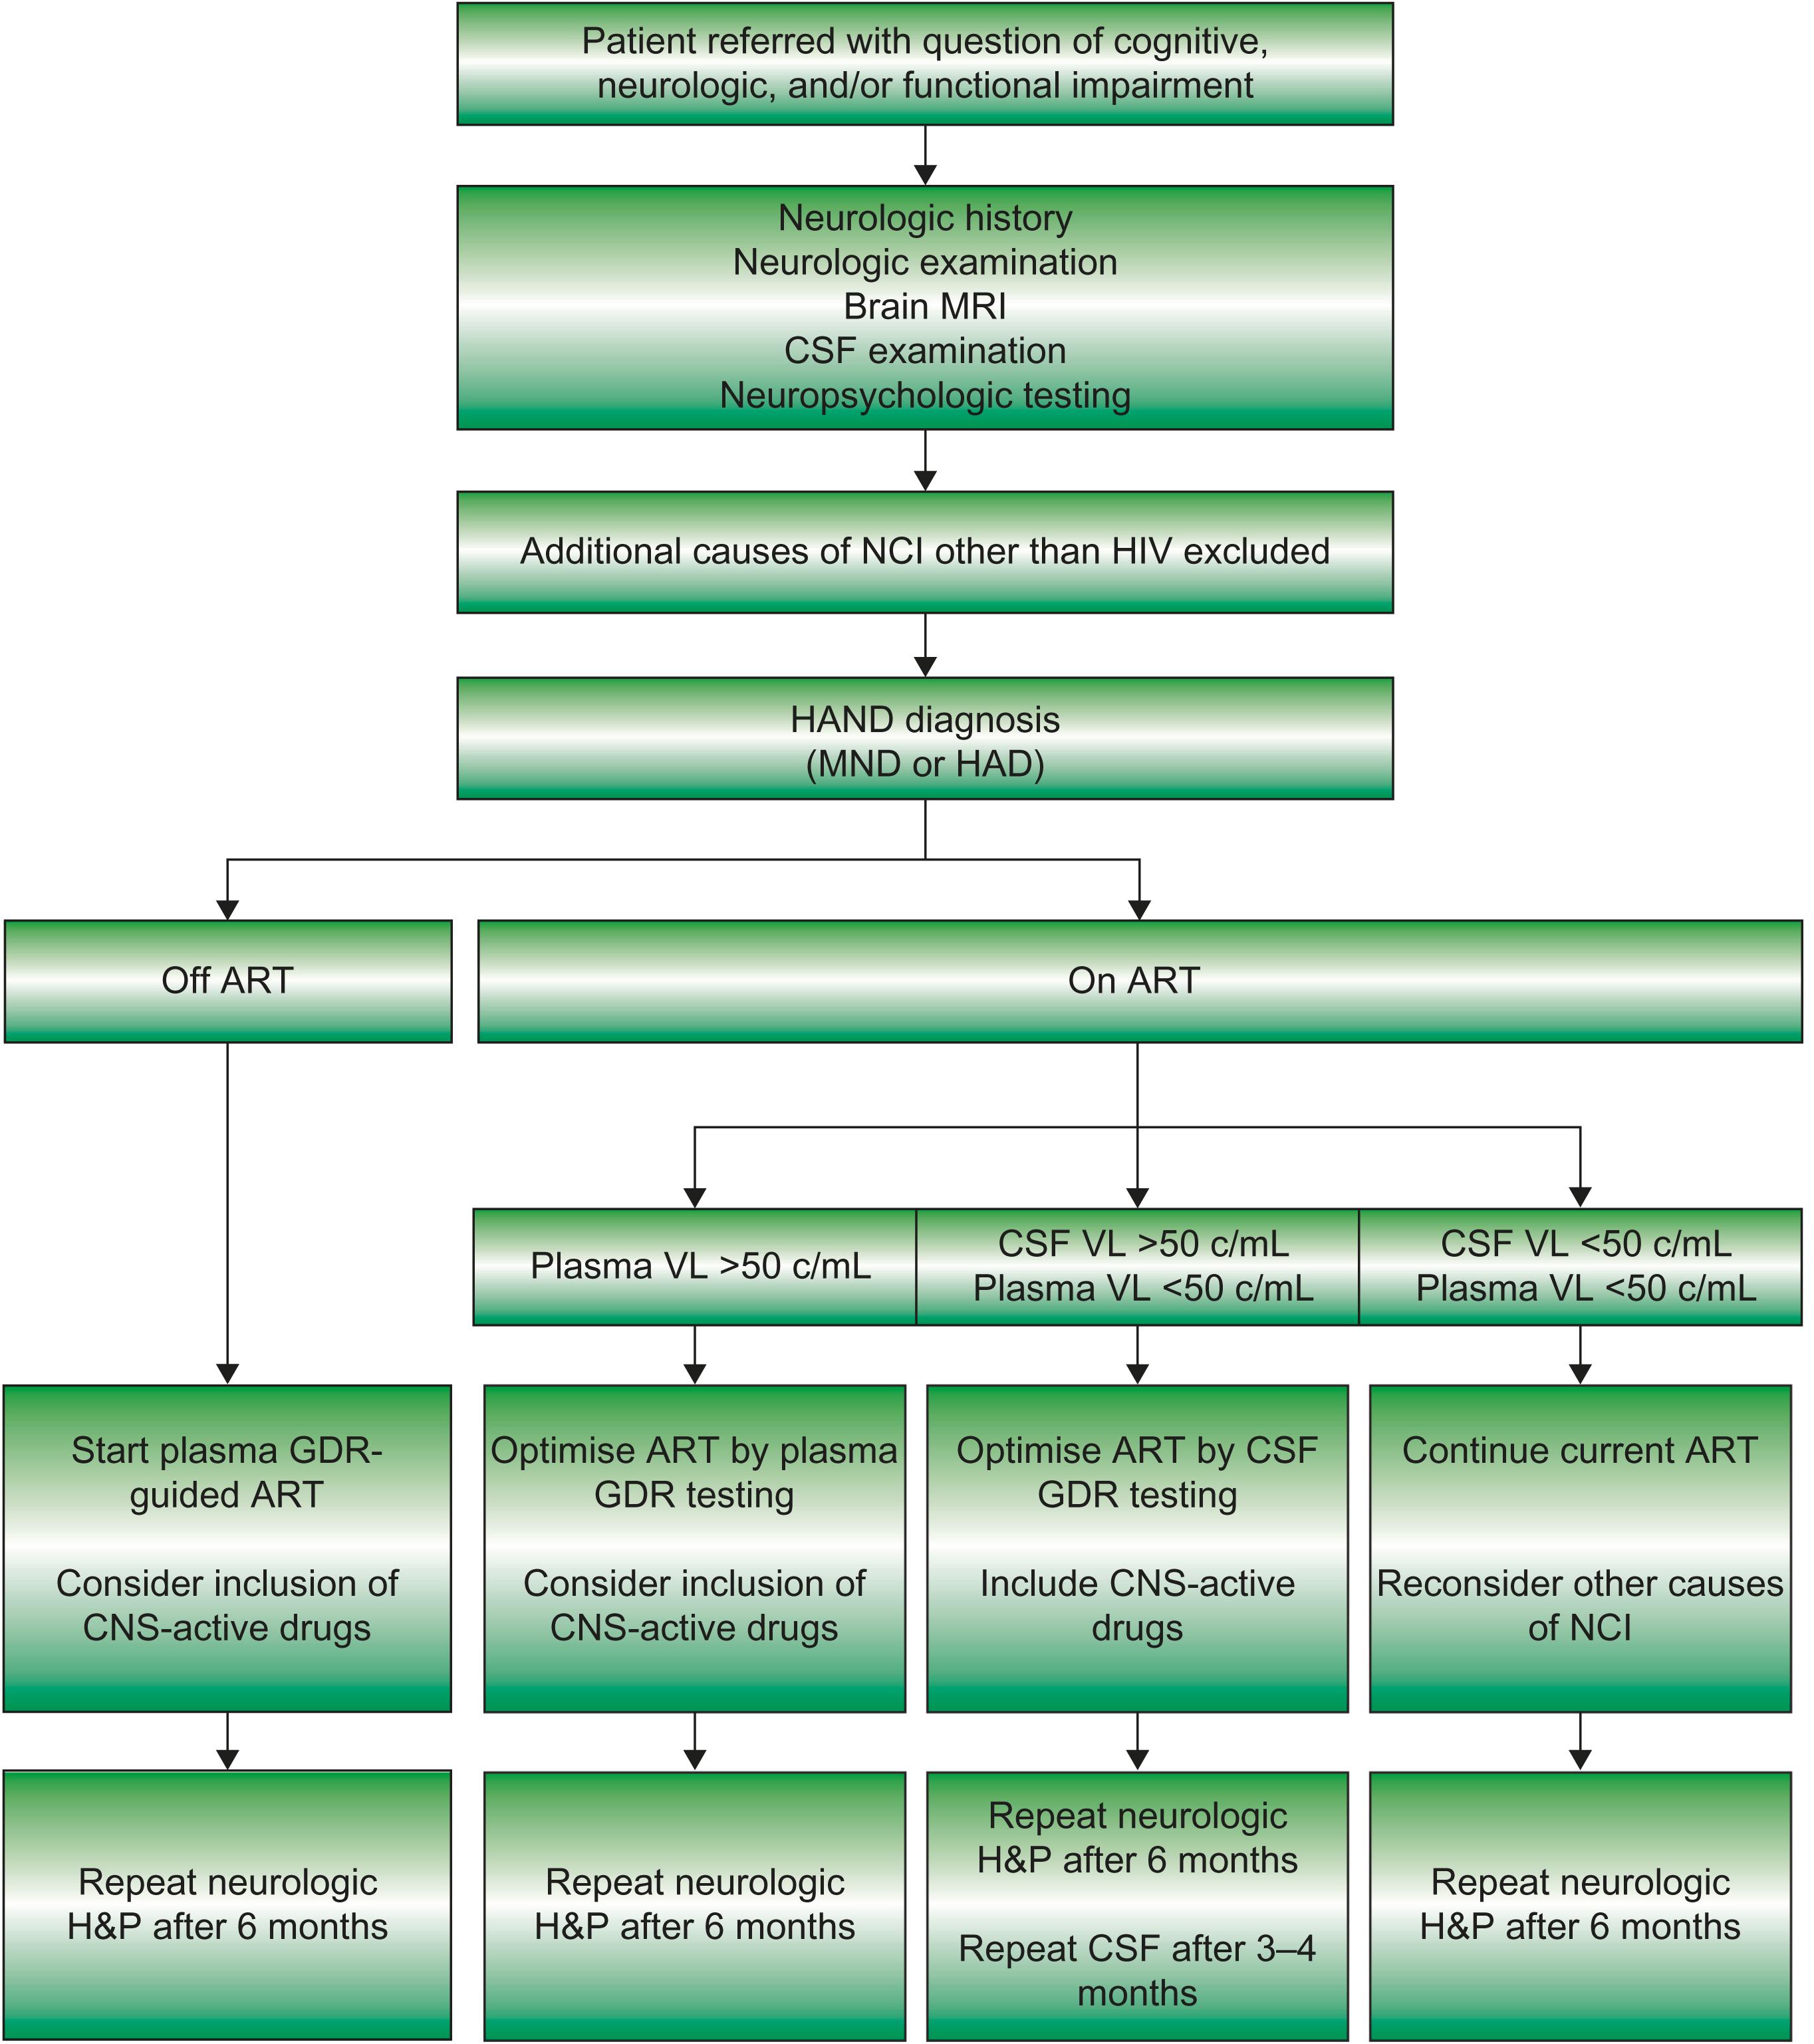 Figure 43-3, Diagnostic and management algorithm for HIV-associated neurocognitive disorder. GDR, genotype drug resistance; H&P, history and physical examination; MND, mild neurocognitive disorder; NCI, neurocognitive impairment; VL, viral load.